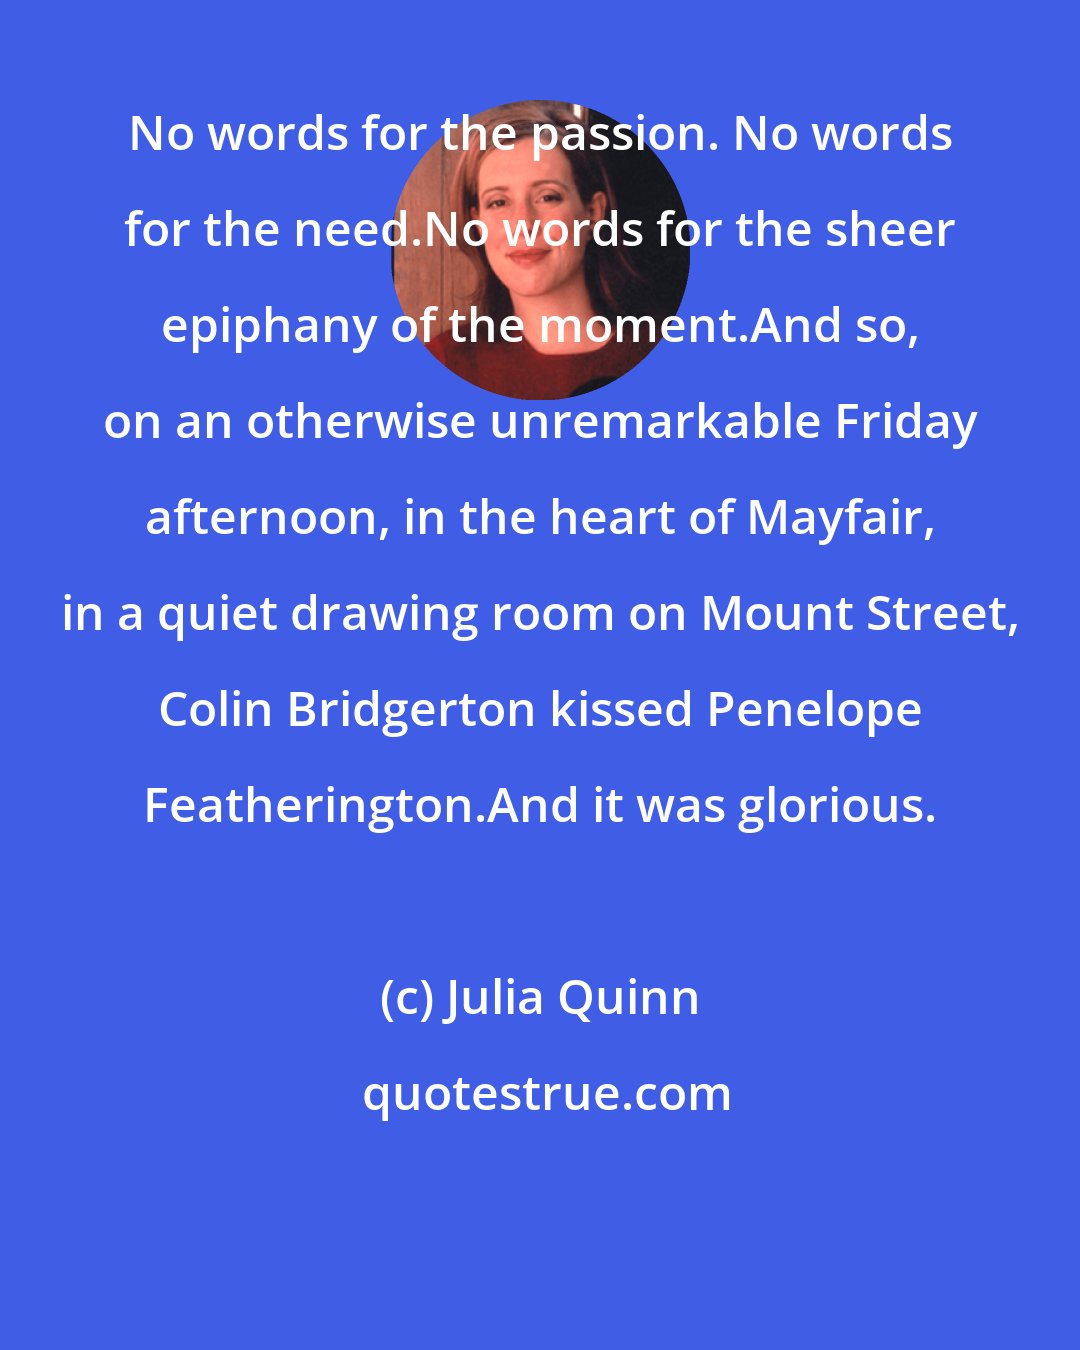 Julia Quinn: No words for the passion. No words for the need.No words for the sheer epiphany of the moment.And so, on an otherwise unremarkable Friday afternoon, in the heart of Mayfair, in a quiet drawing room on Mount Street, Colin Bridgerton kissed Penelope Featherington.And it was glorious.